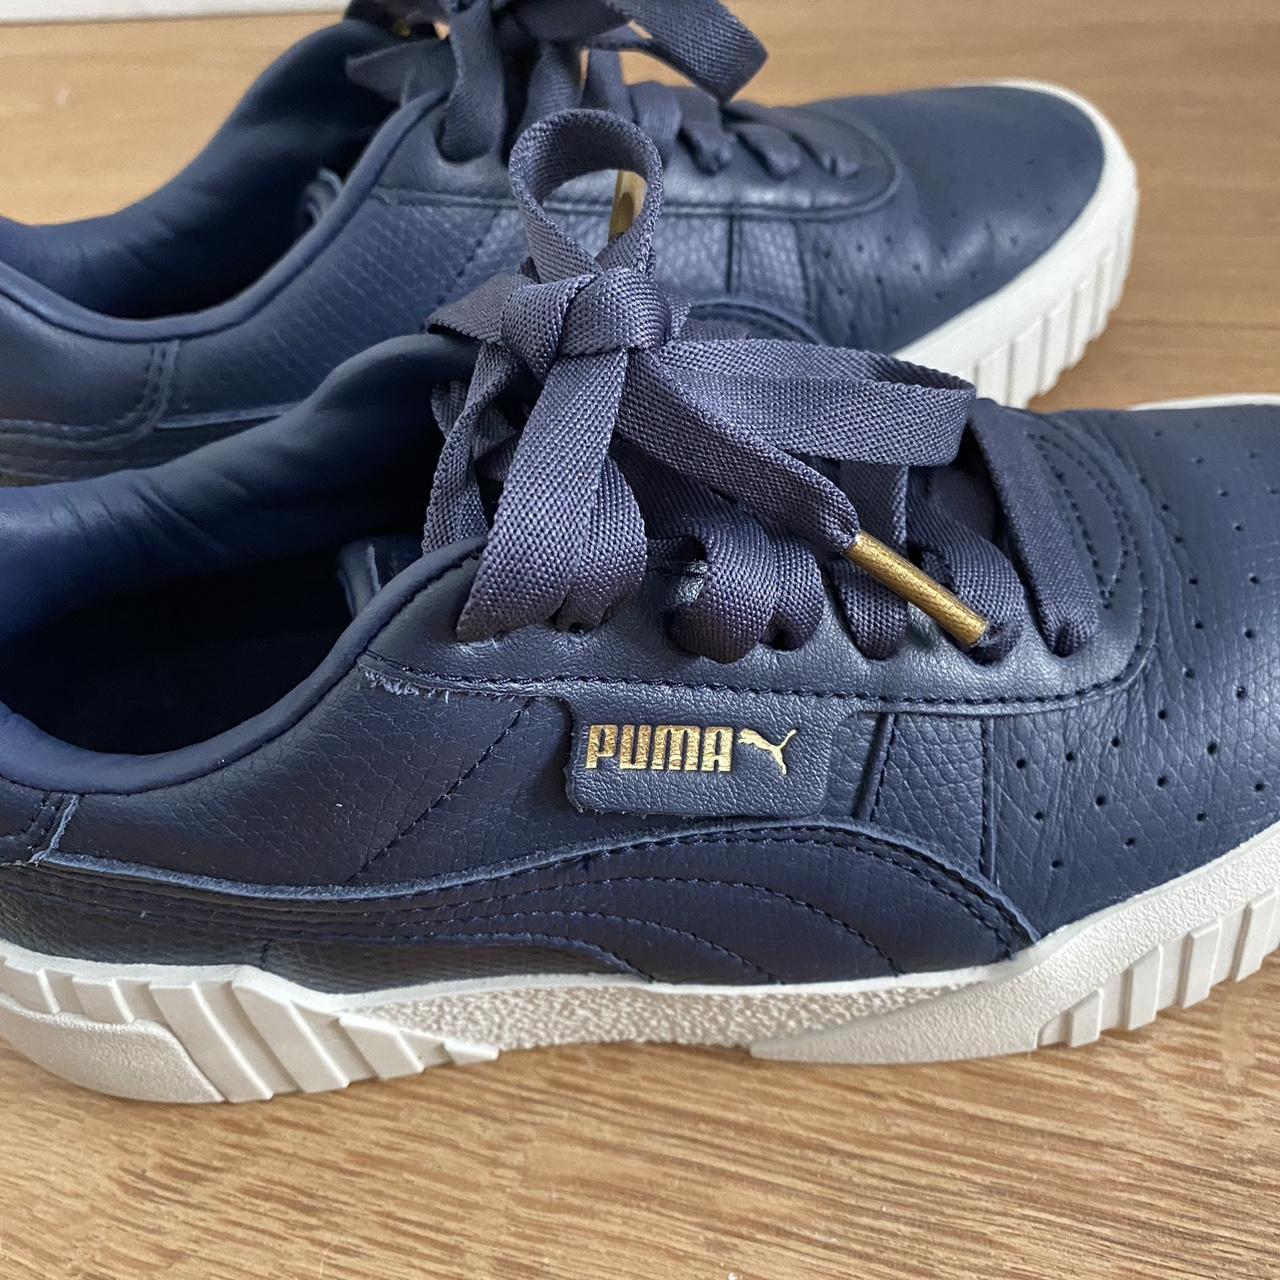 Depop W/ excellent... SNEAKERS NAVY - LACES PUMA RIBBON In